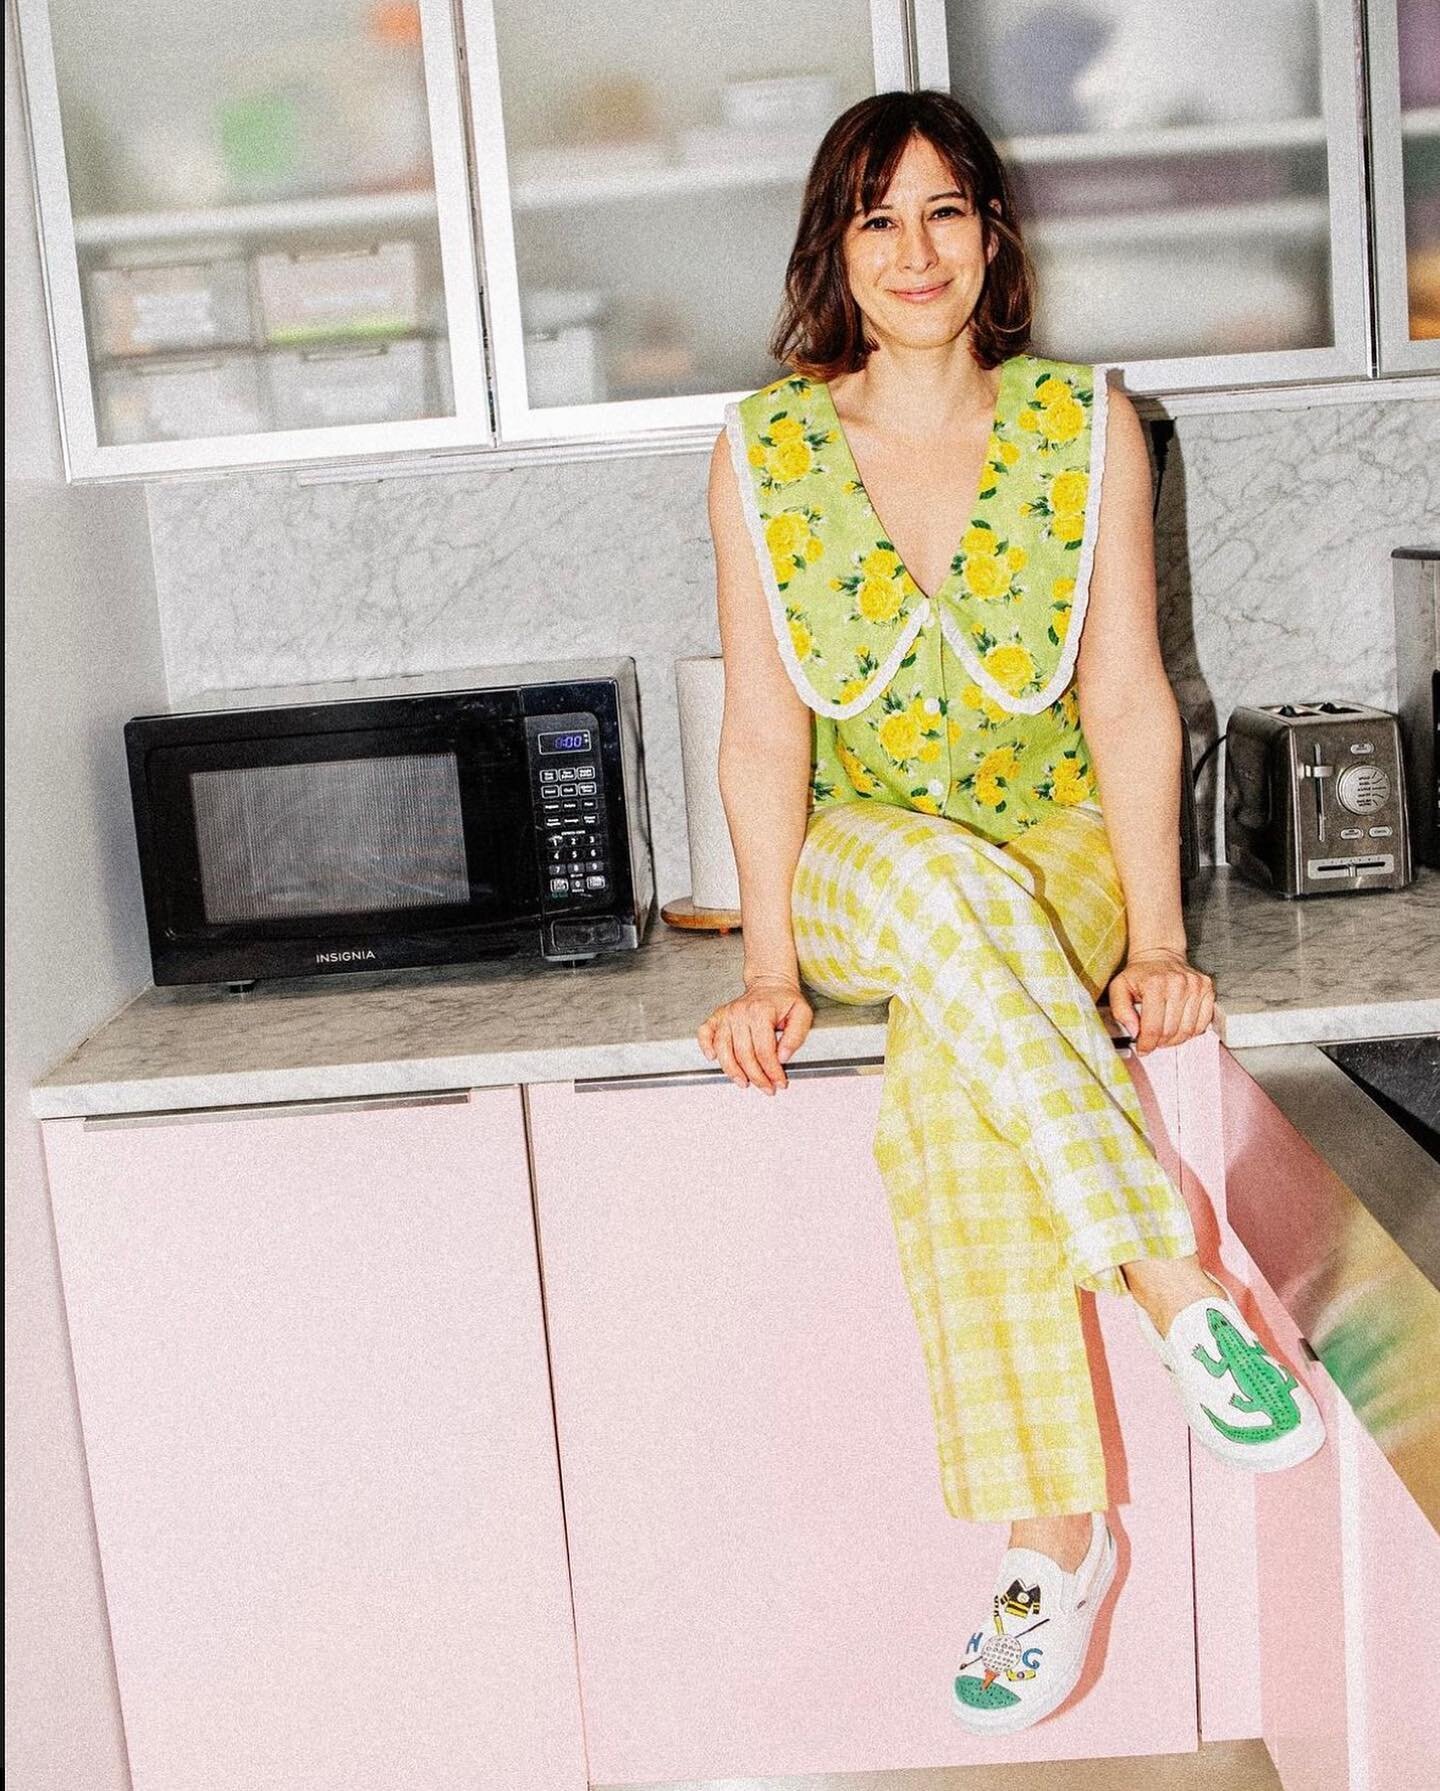 @rachelantonoff gives @renttherunway the inside scoop on her spring &lsquo;24 collection and inspo behind the brand 💛

#fashion #womensfashion #designers #rachelantonoff #renttherunway #prints #springstyle #springfashion #nydesigner